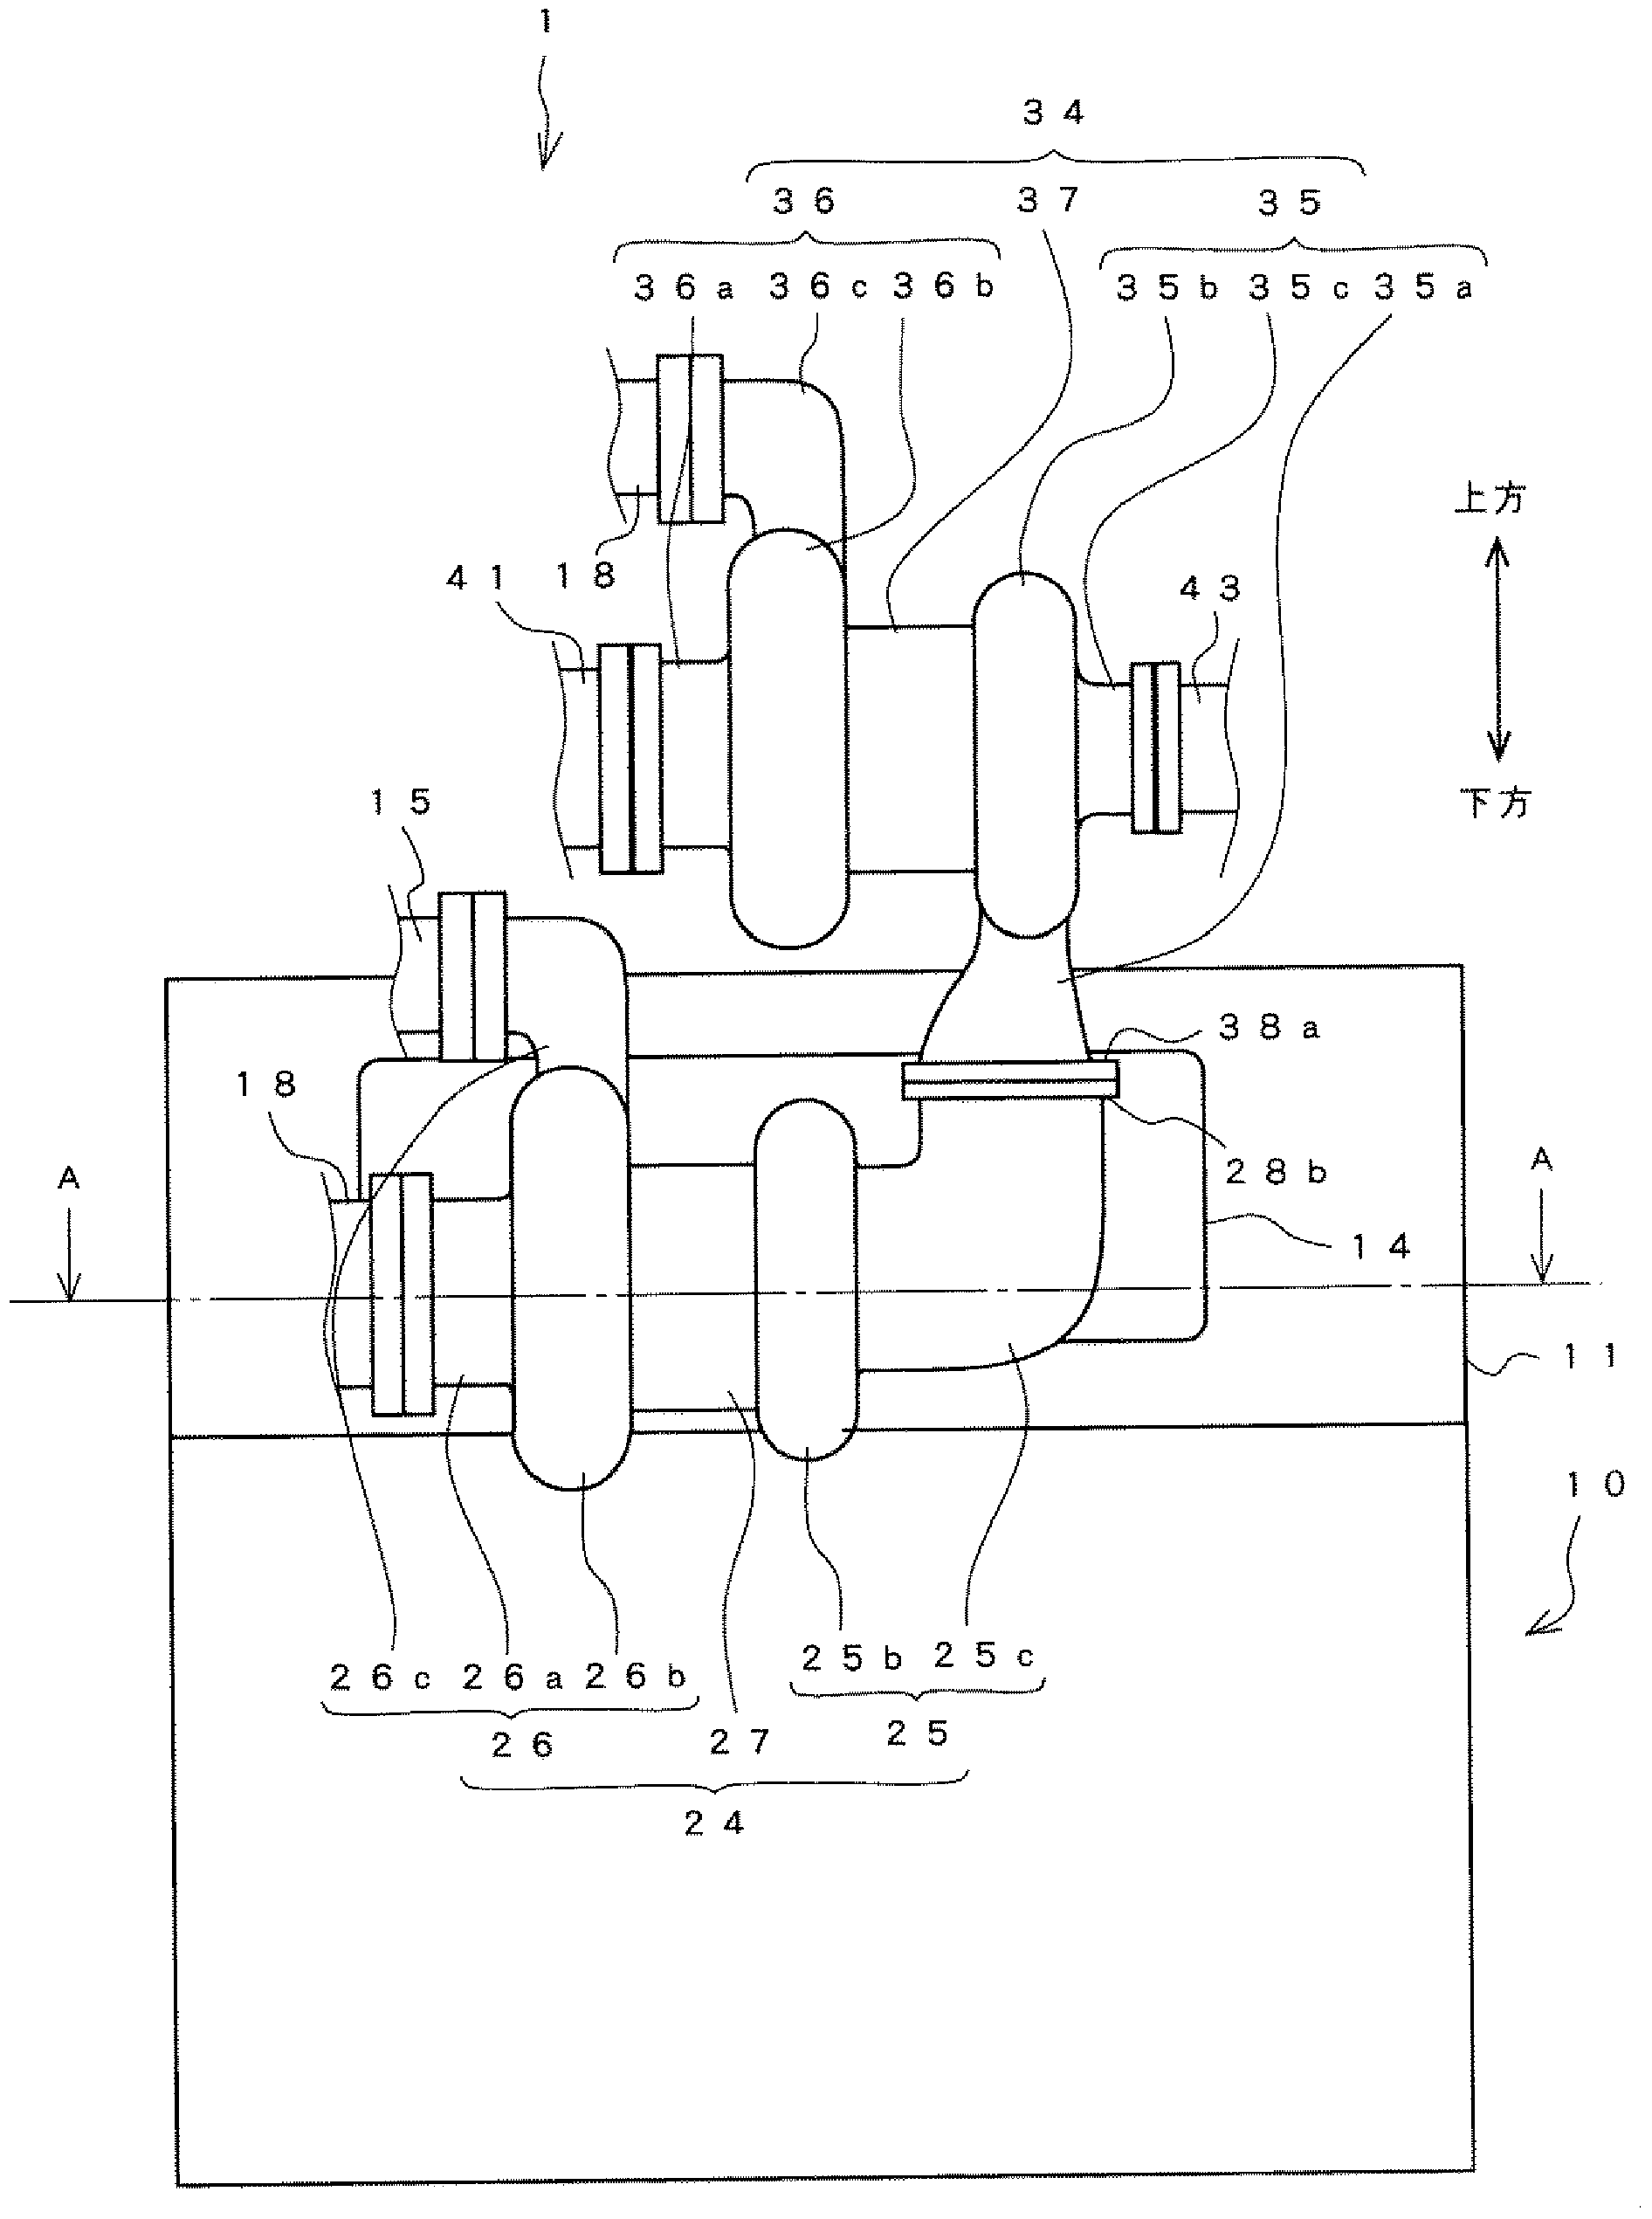 Multi-stage supercharging device